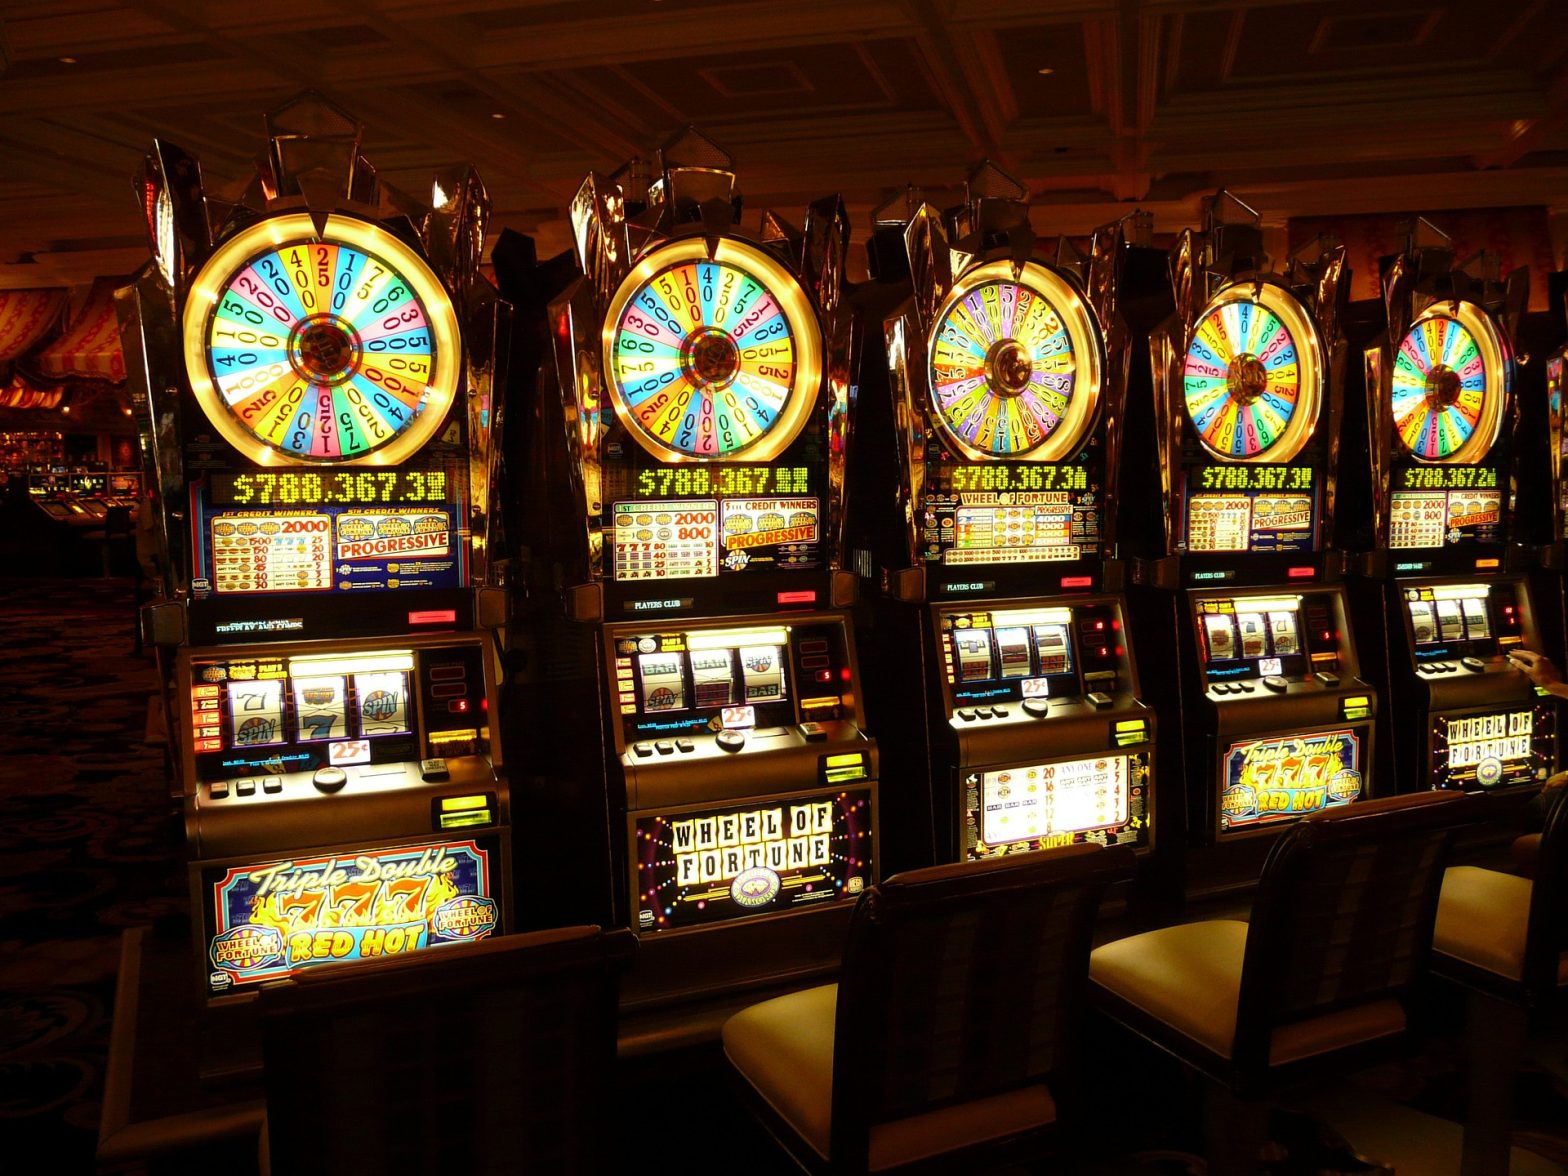 How do slot machines actually work?